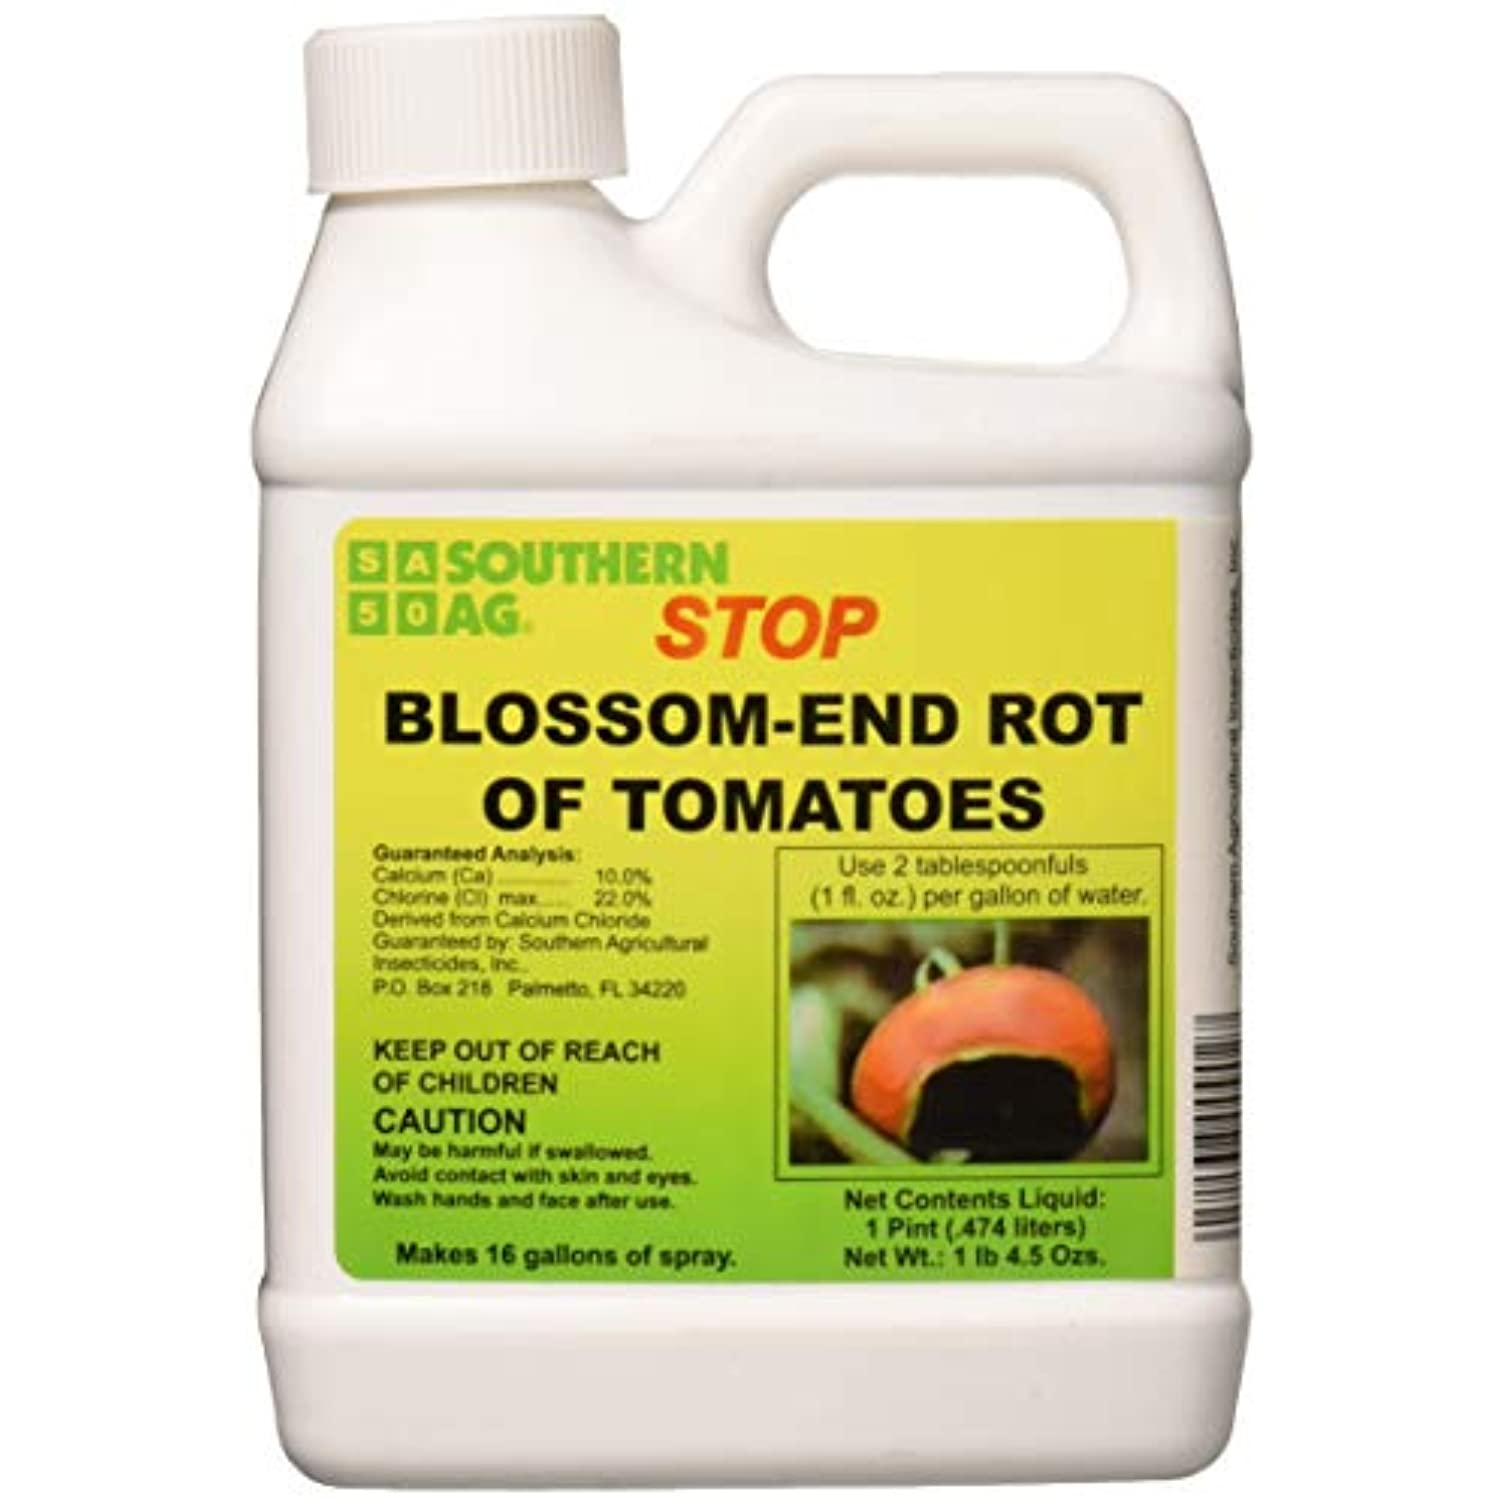 Southern Ag Stop Blossom-End Rot of Tomatoes, 16 Ounce